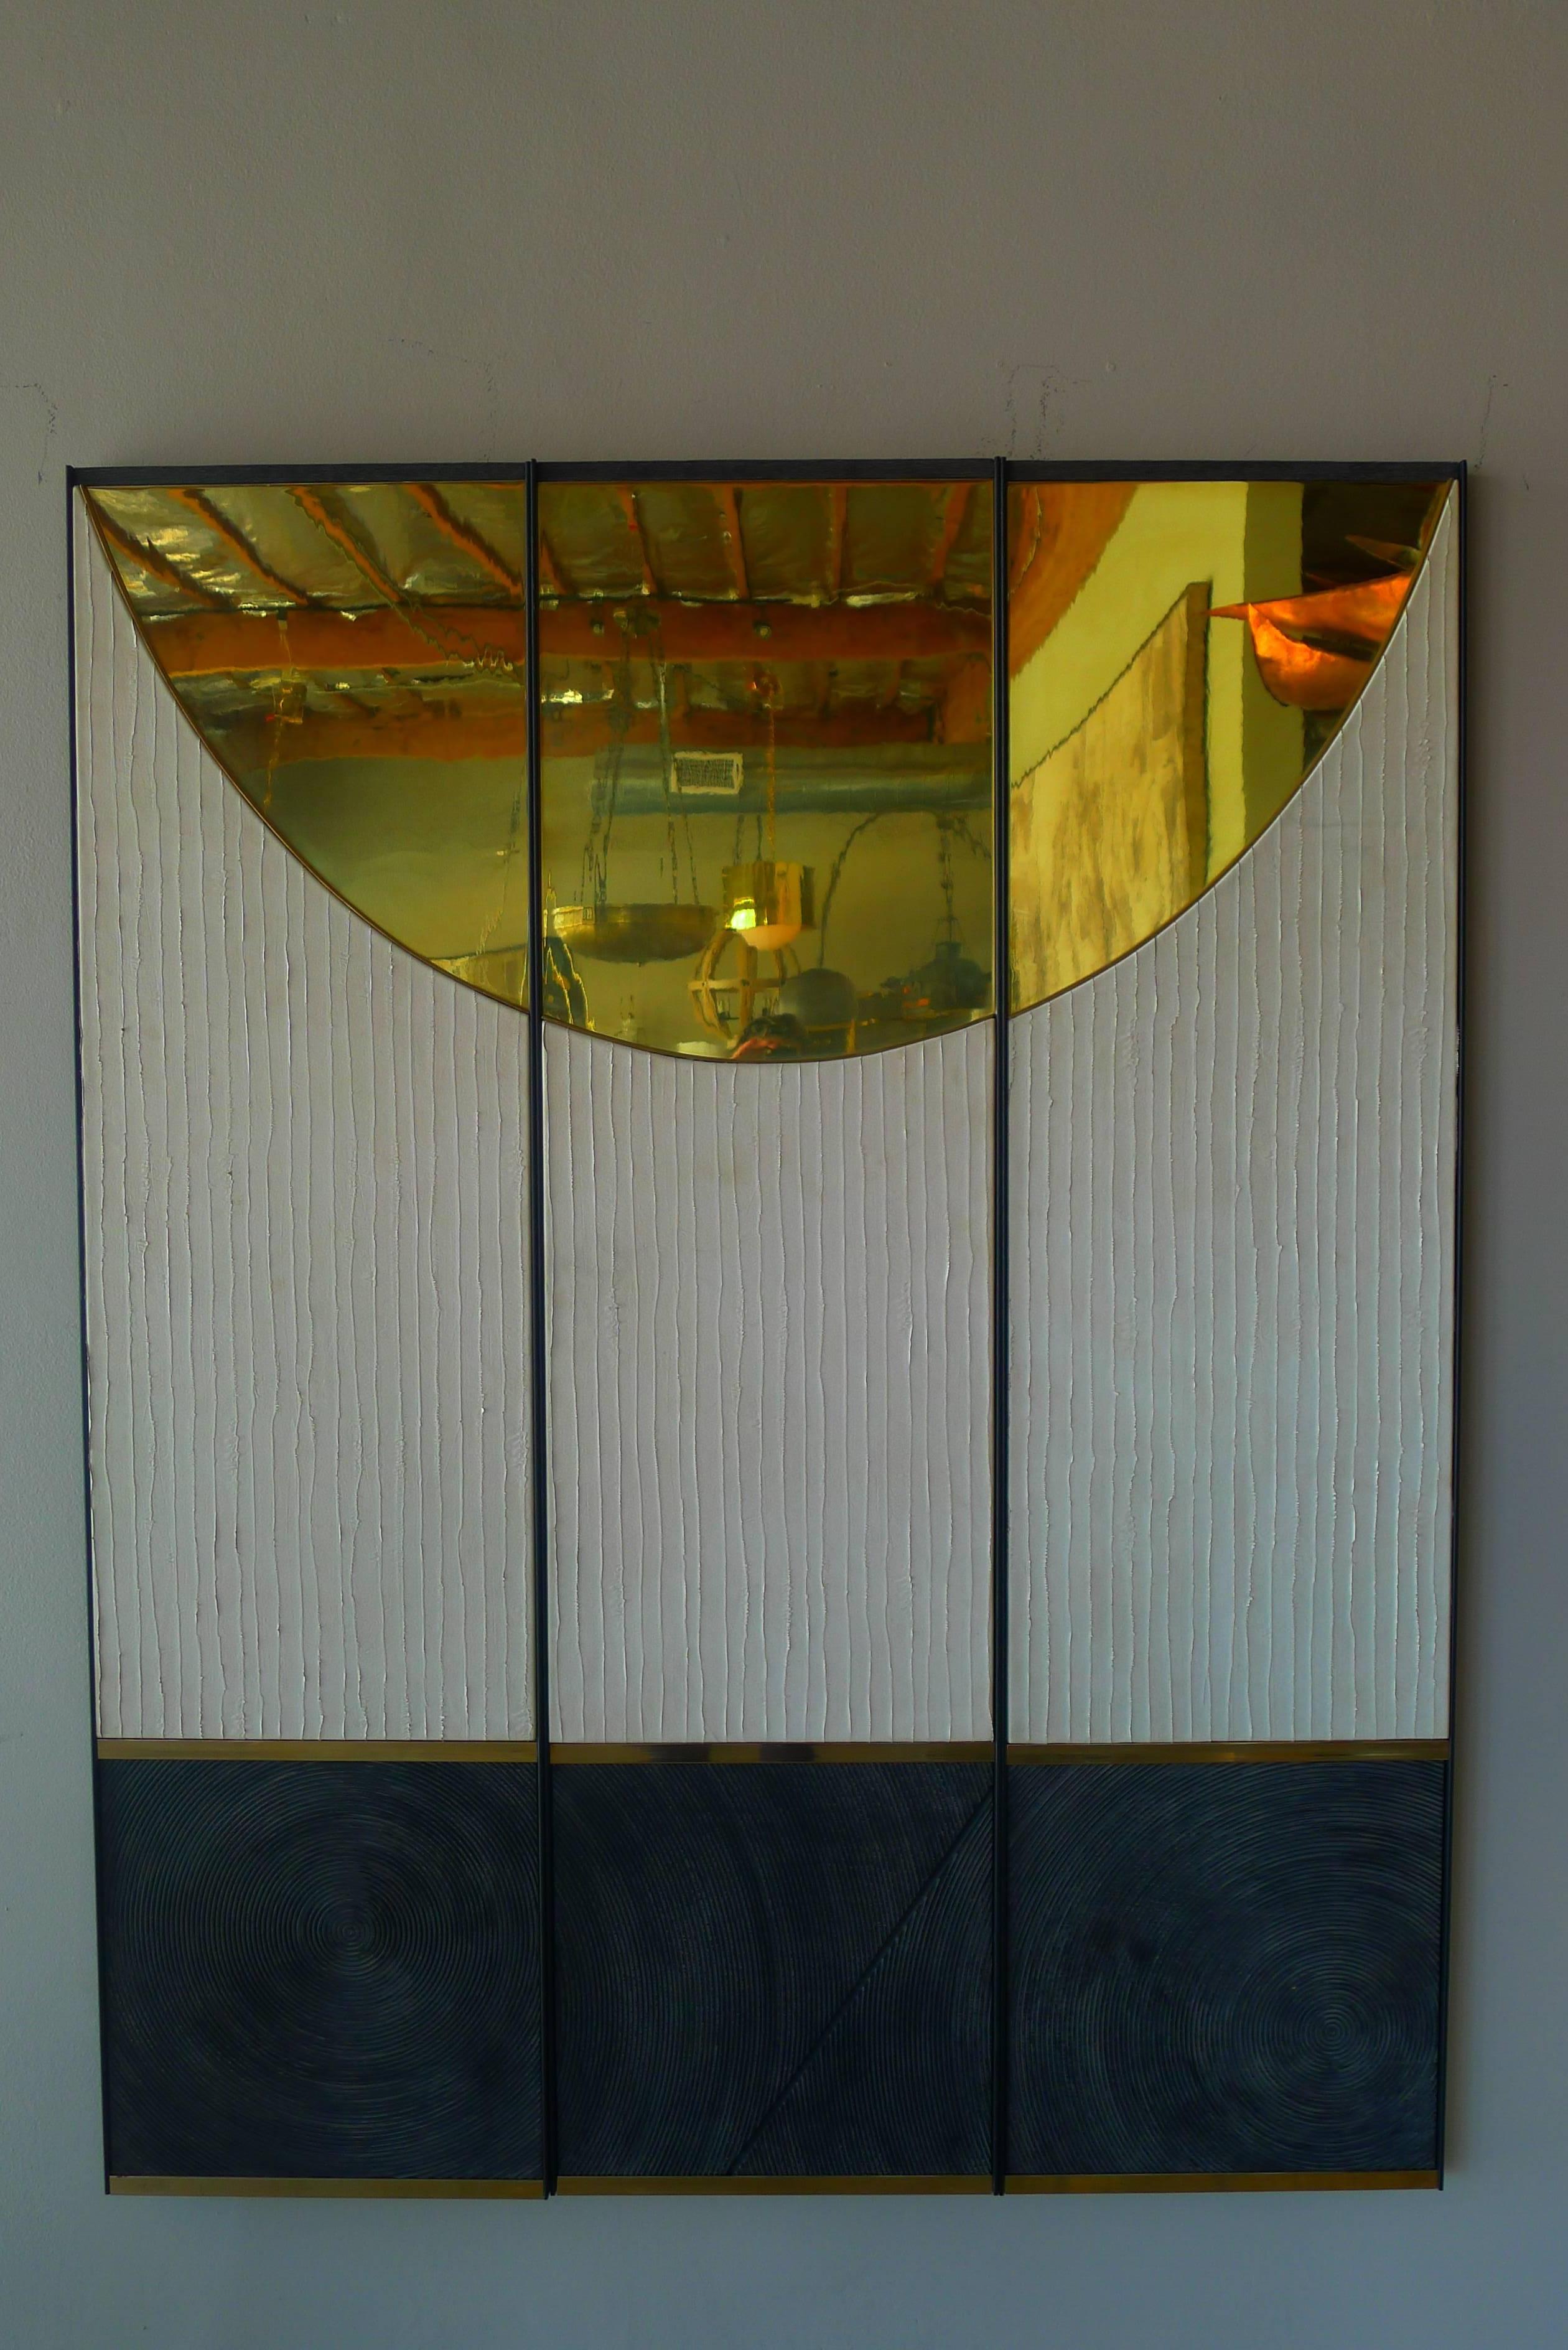 Triptych wall art panels by Paul Marra consisting of leather, brass, textured wood, steel frames. Shown hung as 49.5 W - each panel is 16.5 W. Brass has reflective qualities.